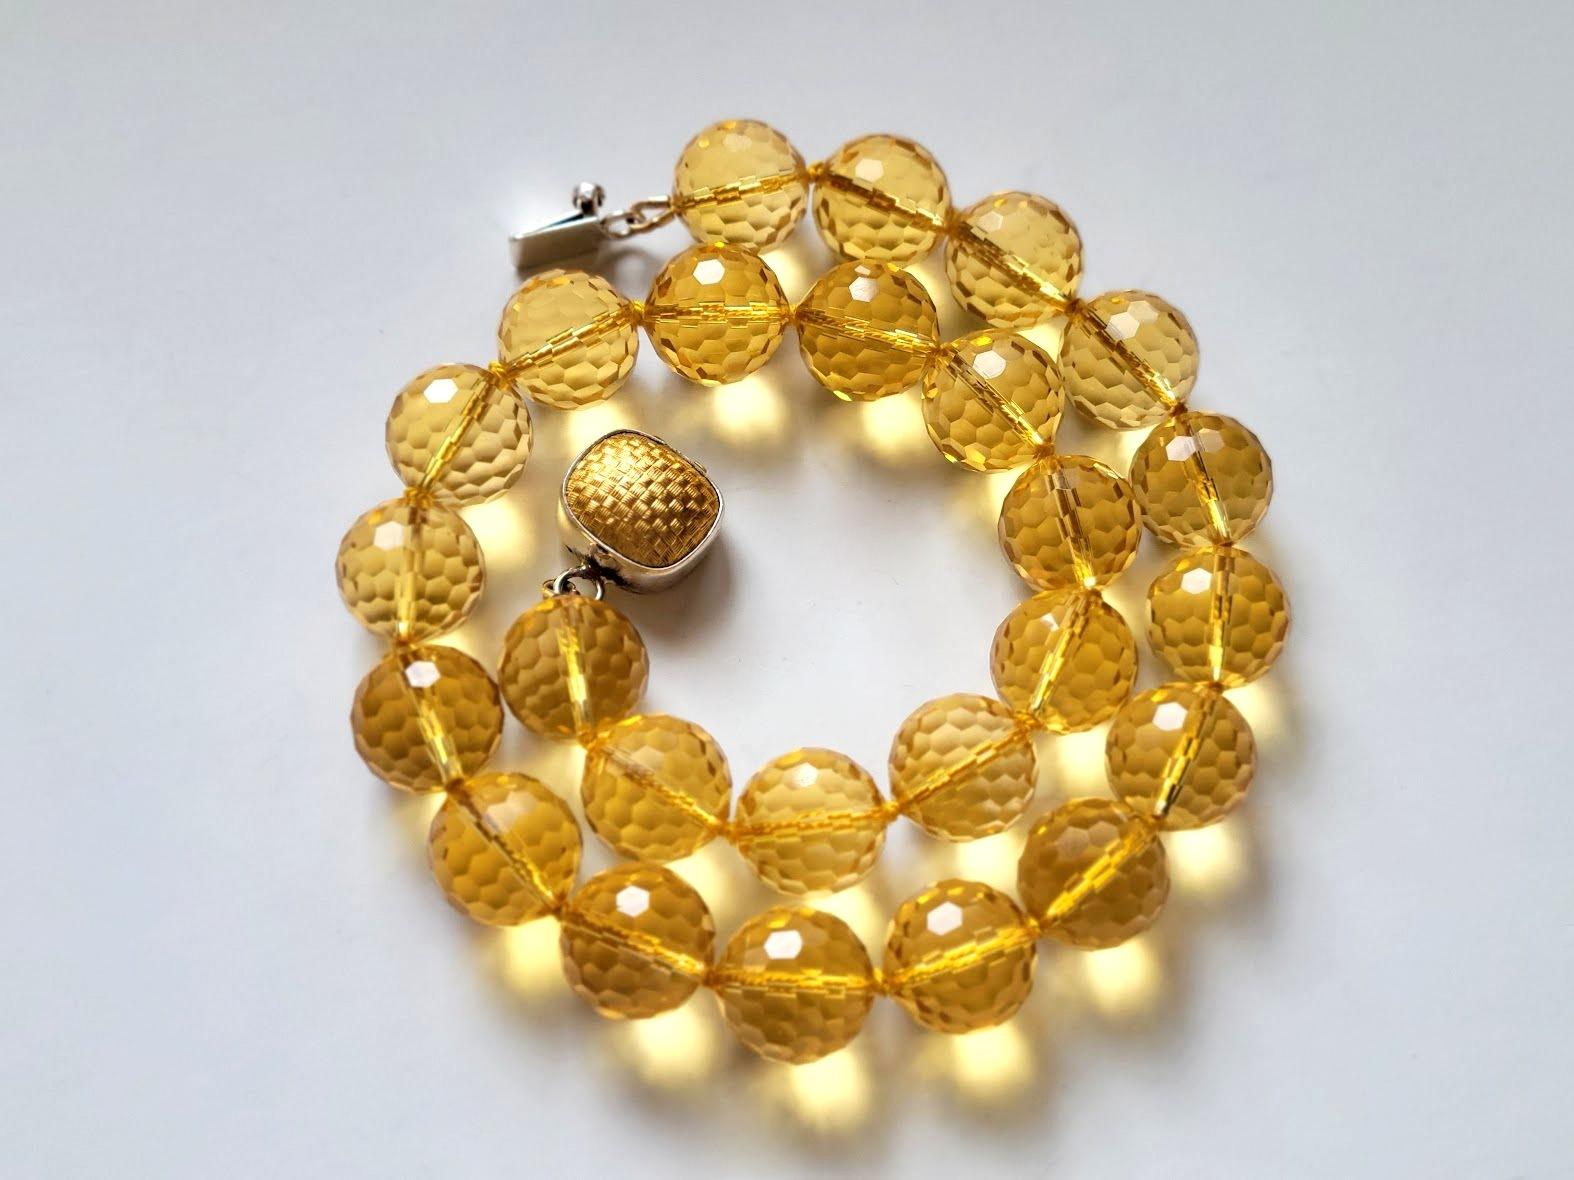 Marquis de Pompadour said: “Champagne is the only drink that leaves a woman still beautiful after drinking it.”
These citrine beads seem to be filled with champagne.
And you will radiate with even more beauty wearing this citrine necklace.
It would